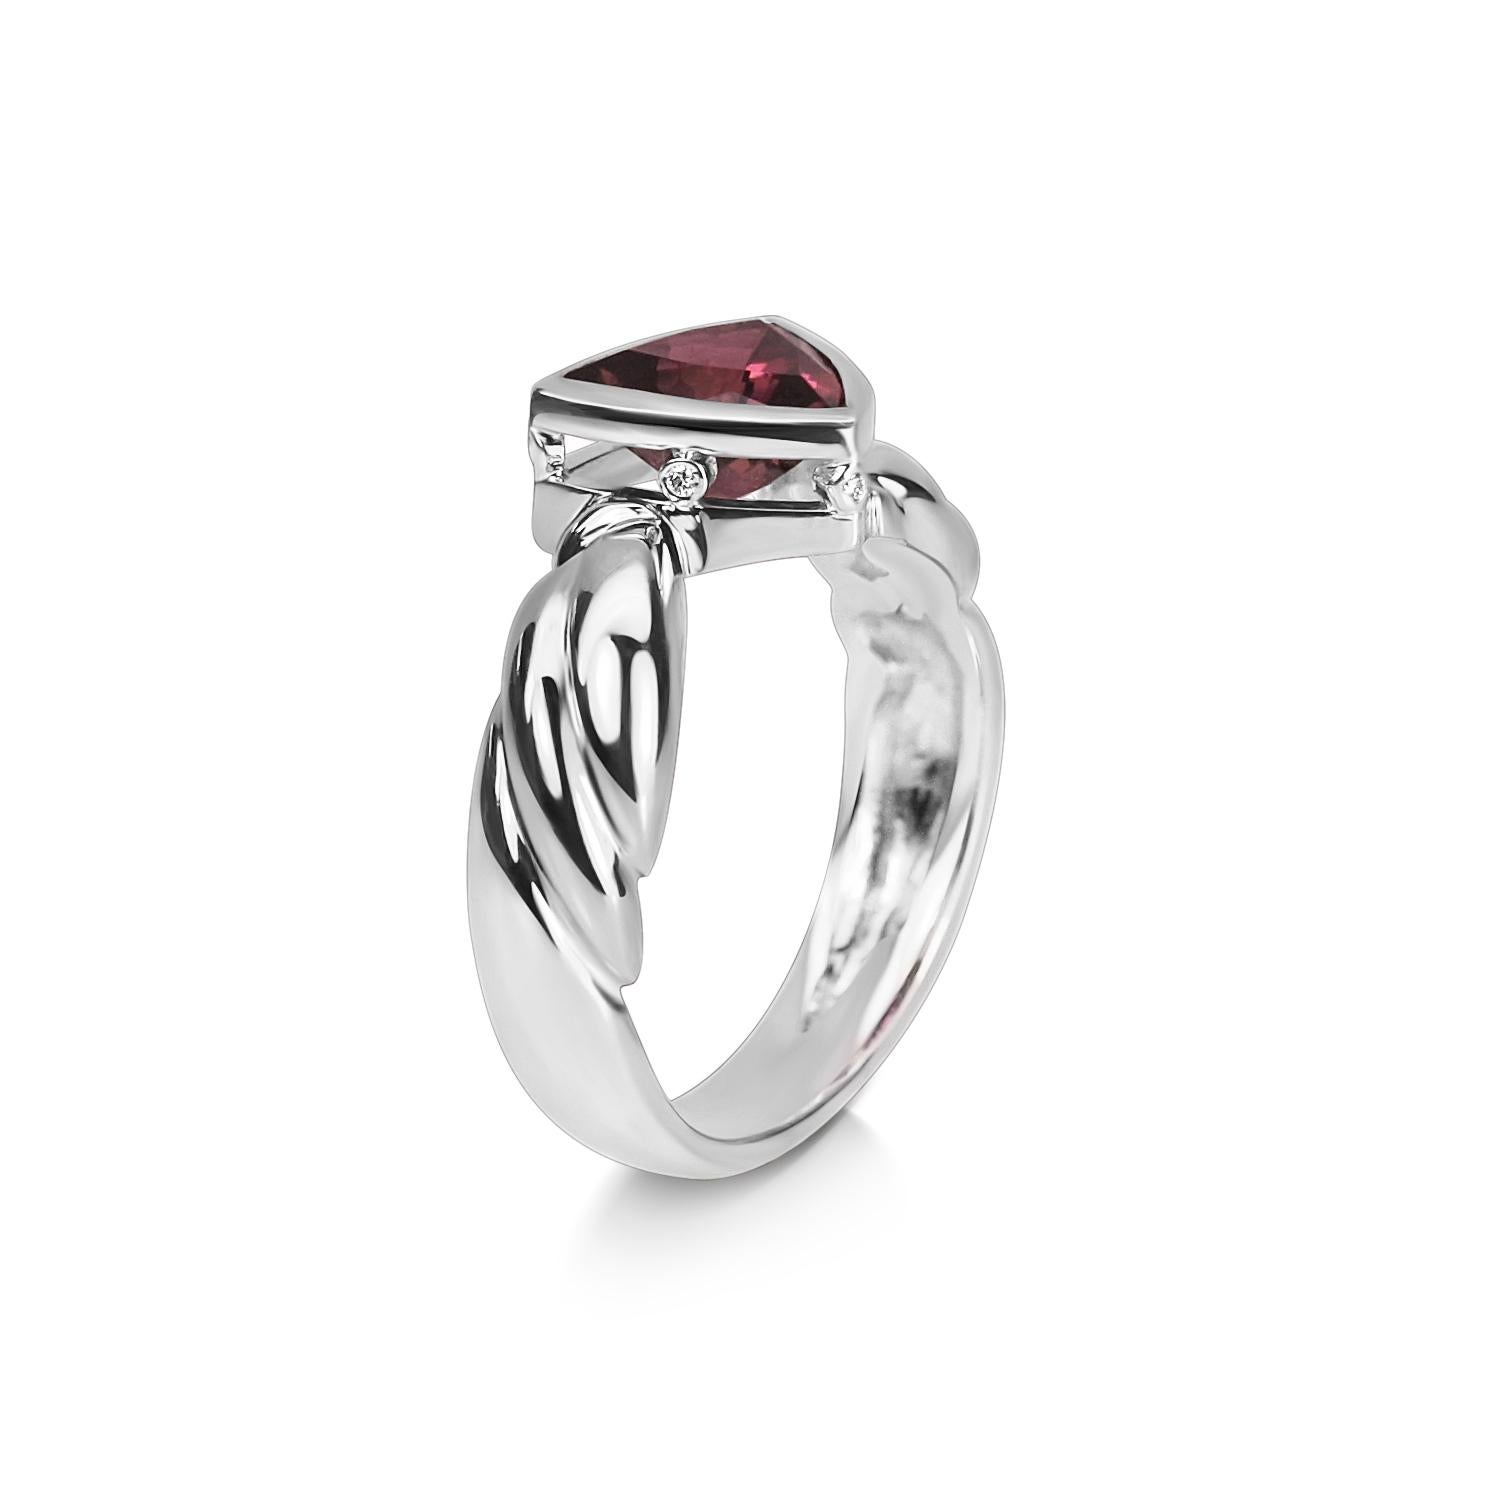 This trillion cut pink tourmaline ring is made in 18ct White Gold with a carved style band. The pink tourmaline is a beautiful faceted deep smokey pink colour and is held in a rubover style setting. The setting has the extra detail of small diamonds